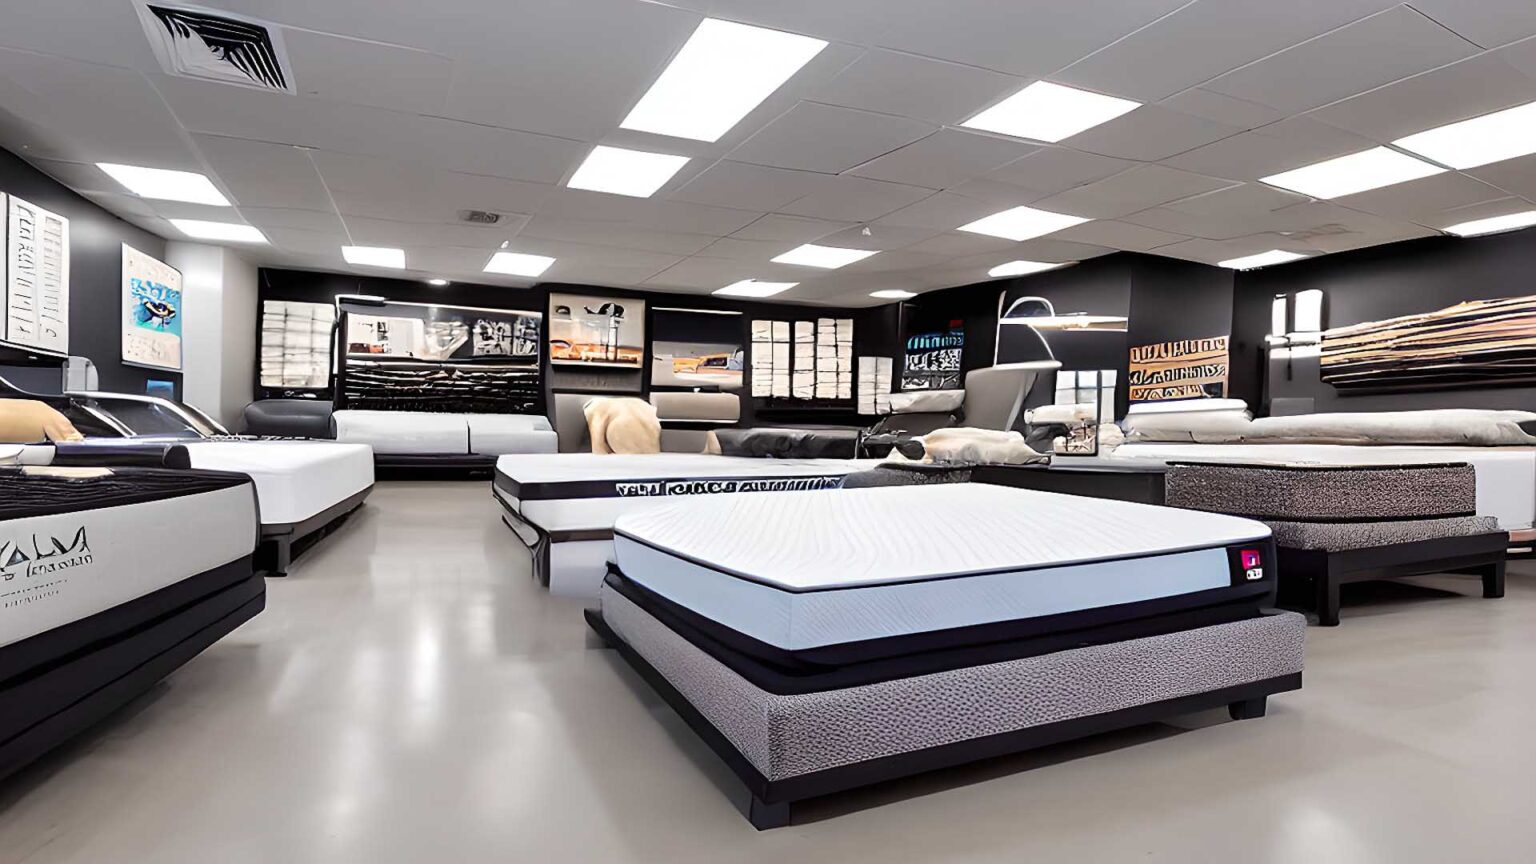 Mattress Stores, mattress dealers, and mattress retailers near me in West Des Moines, IA